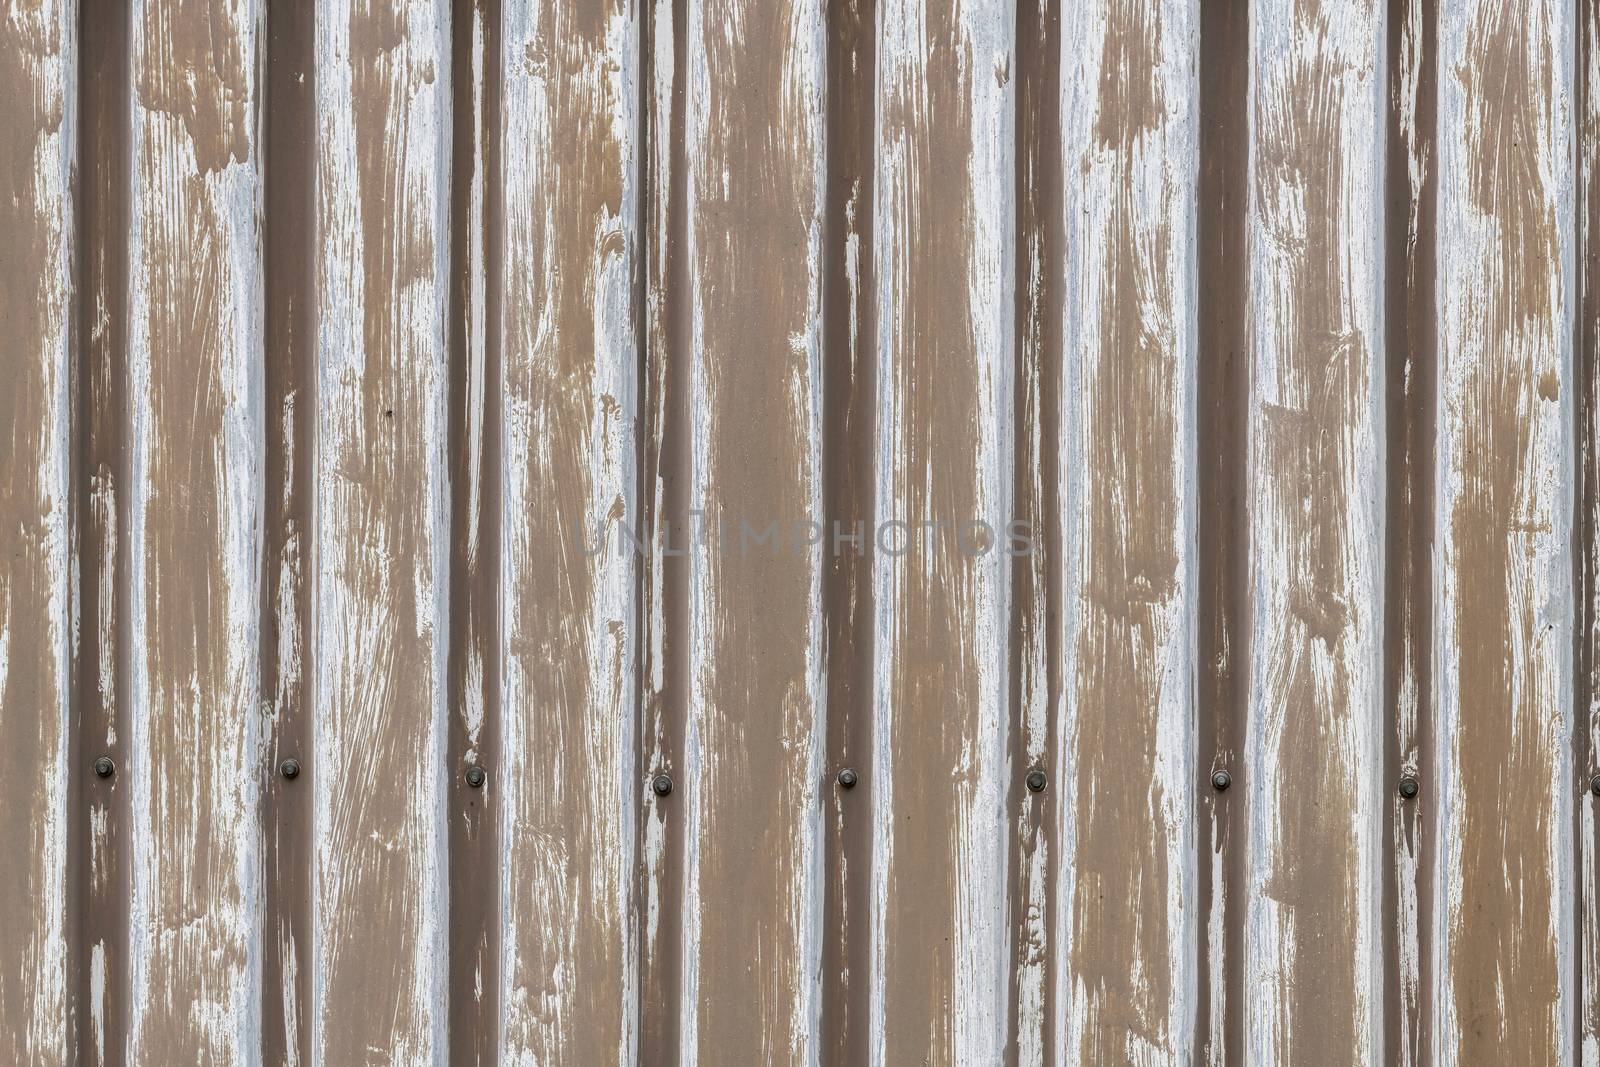 Background photo of brown sheet pile profiles on an old shed shown full-screen